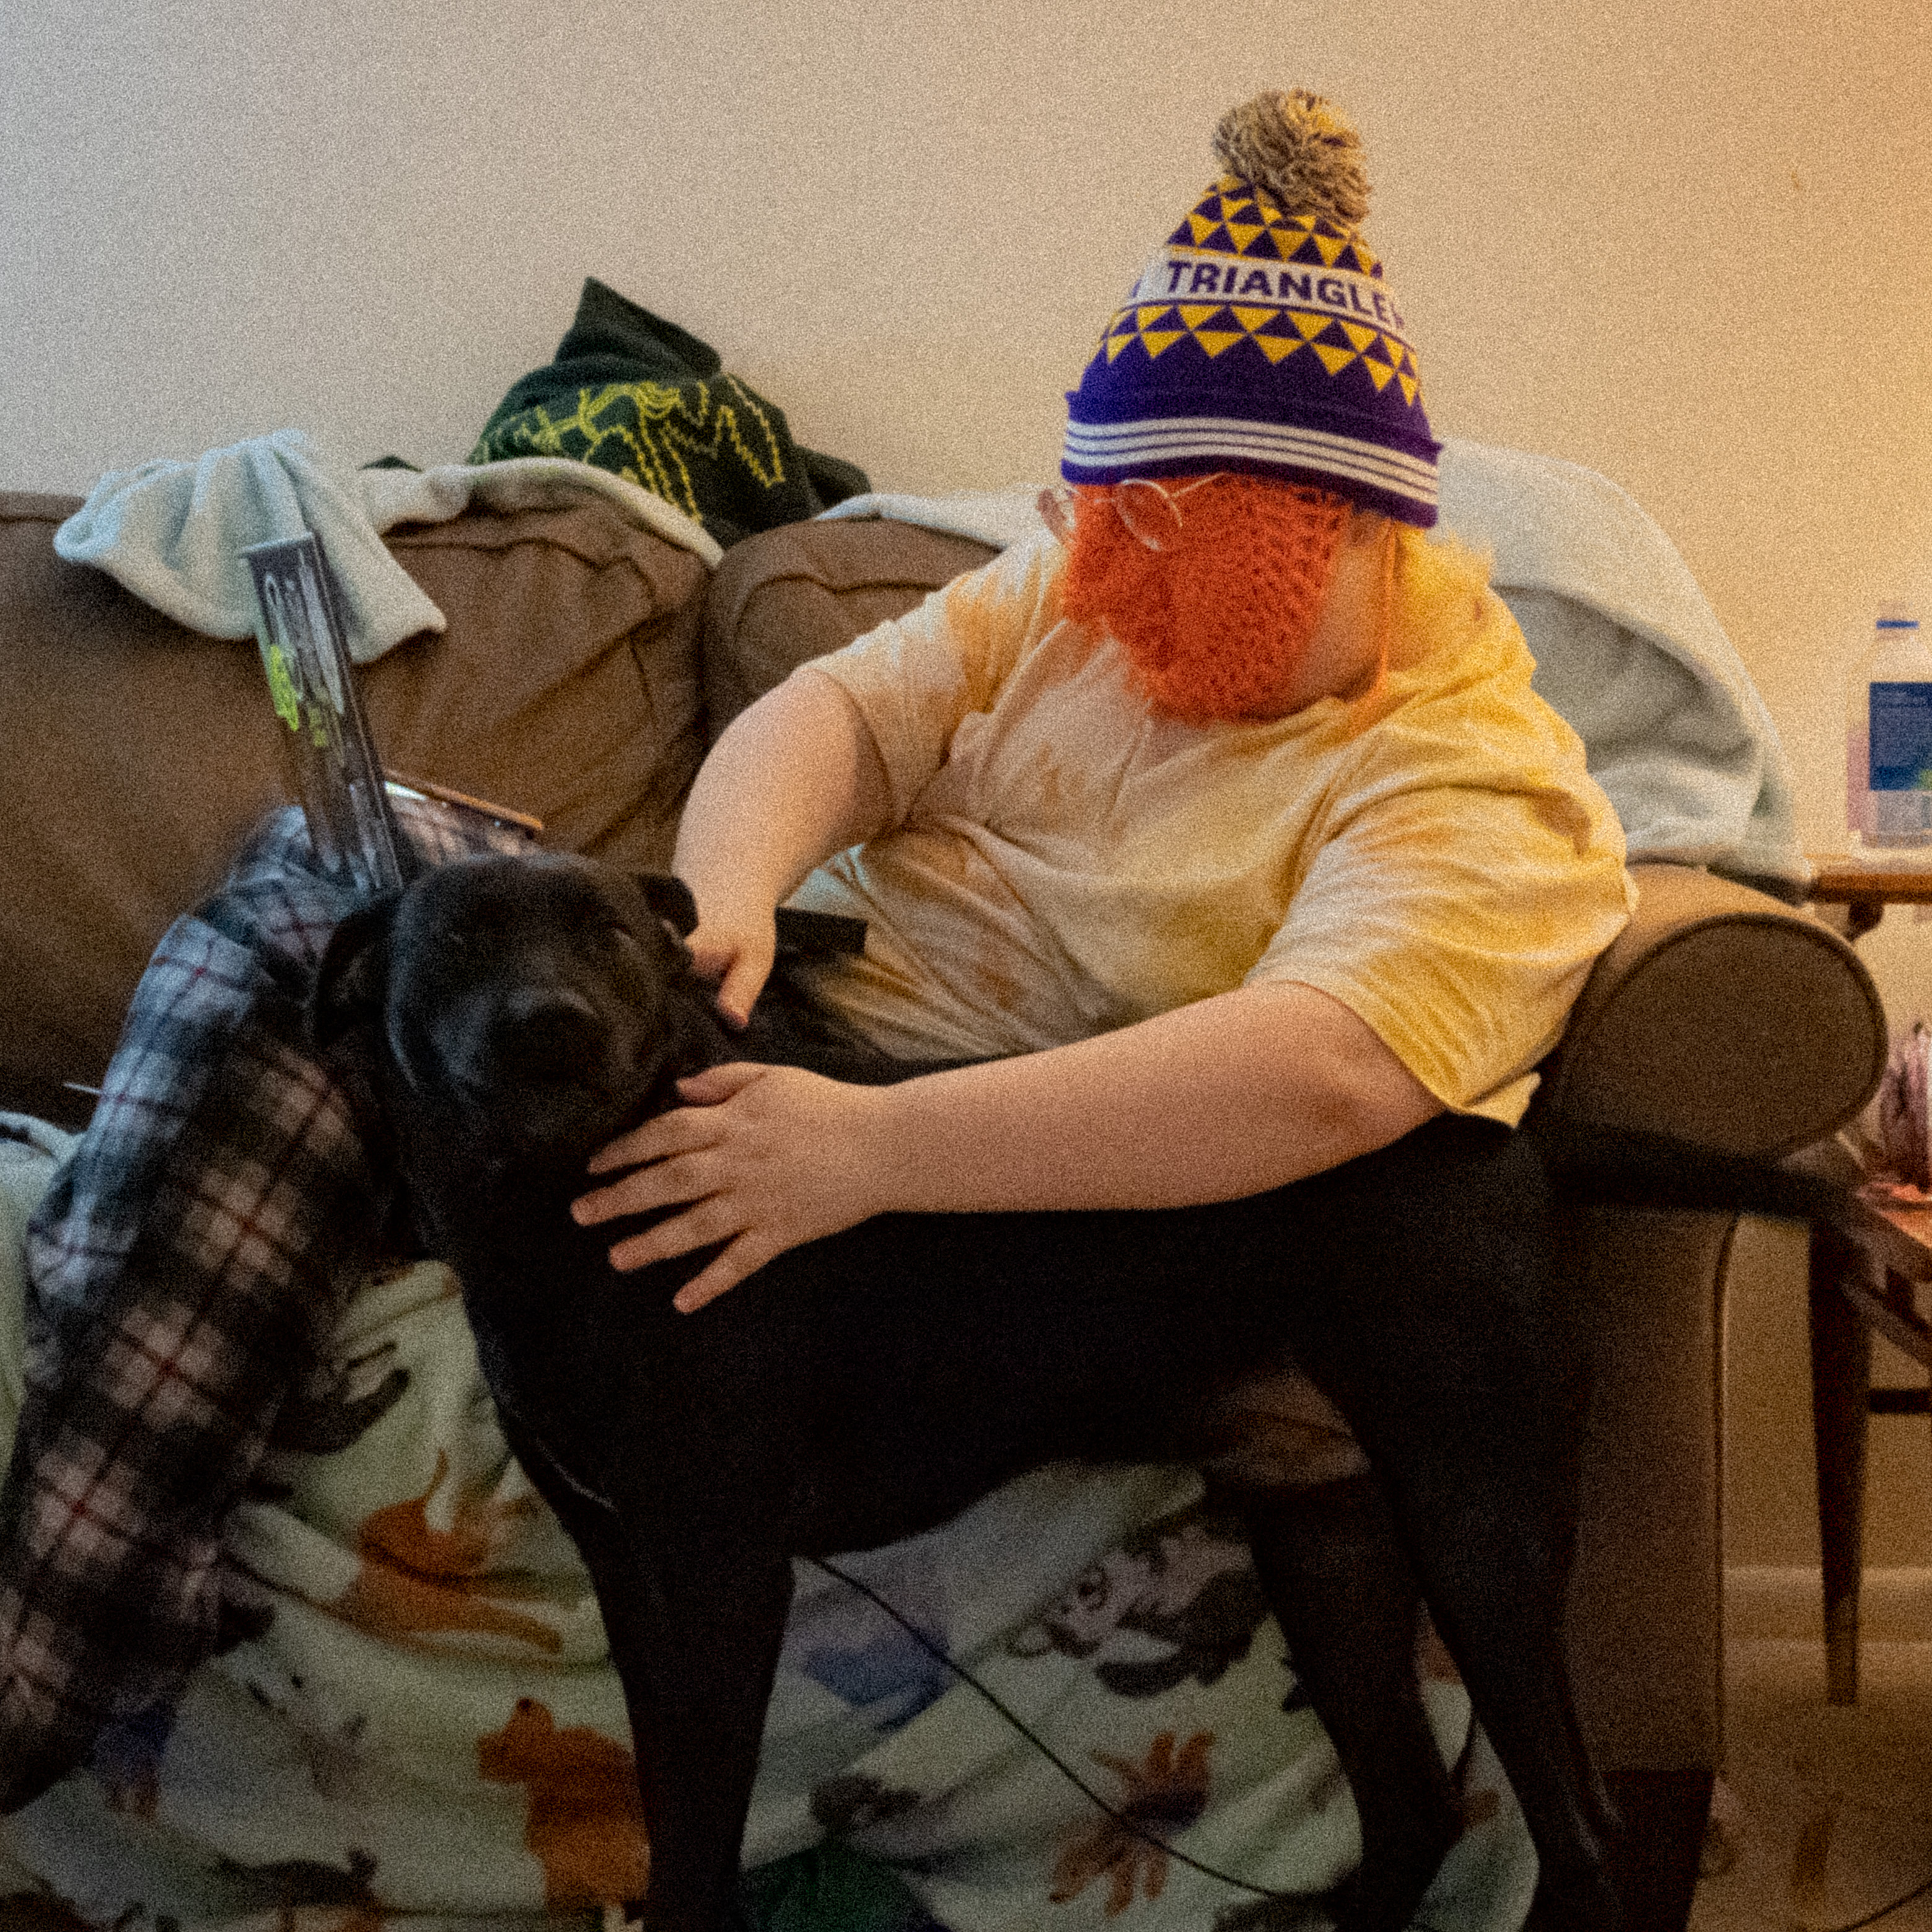 A caucasian person reclines on a couch, wearing an orange mask that conforms to their face and a festive winter hat. They are petting a dog, who looks smugly at the camera